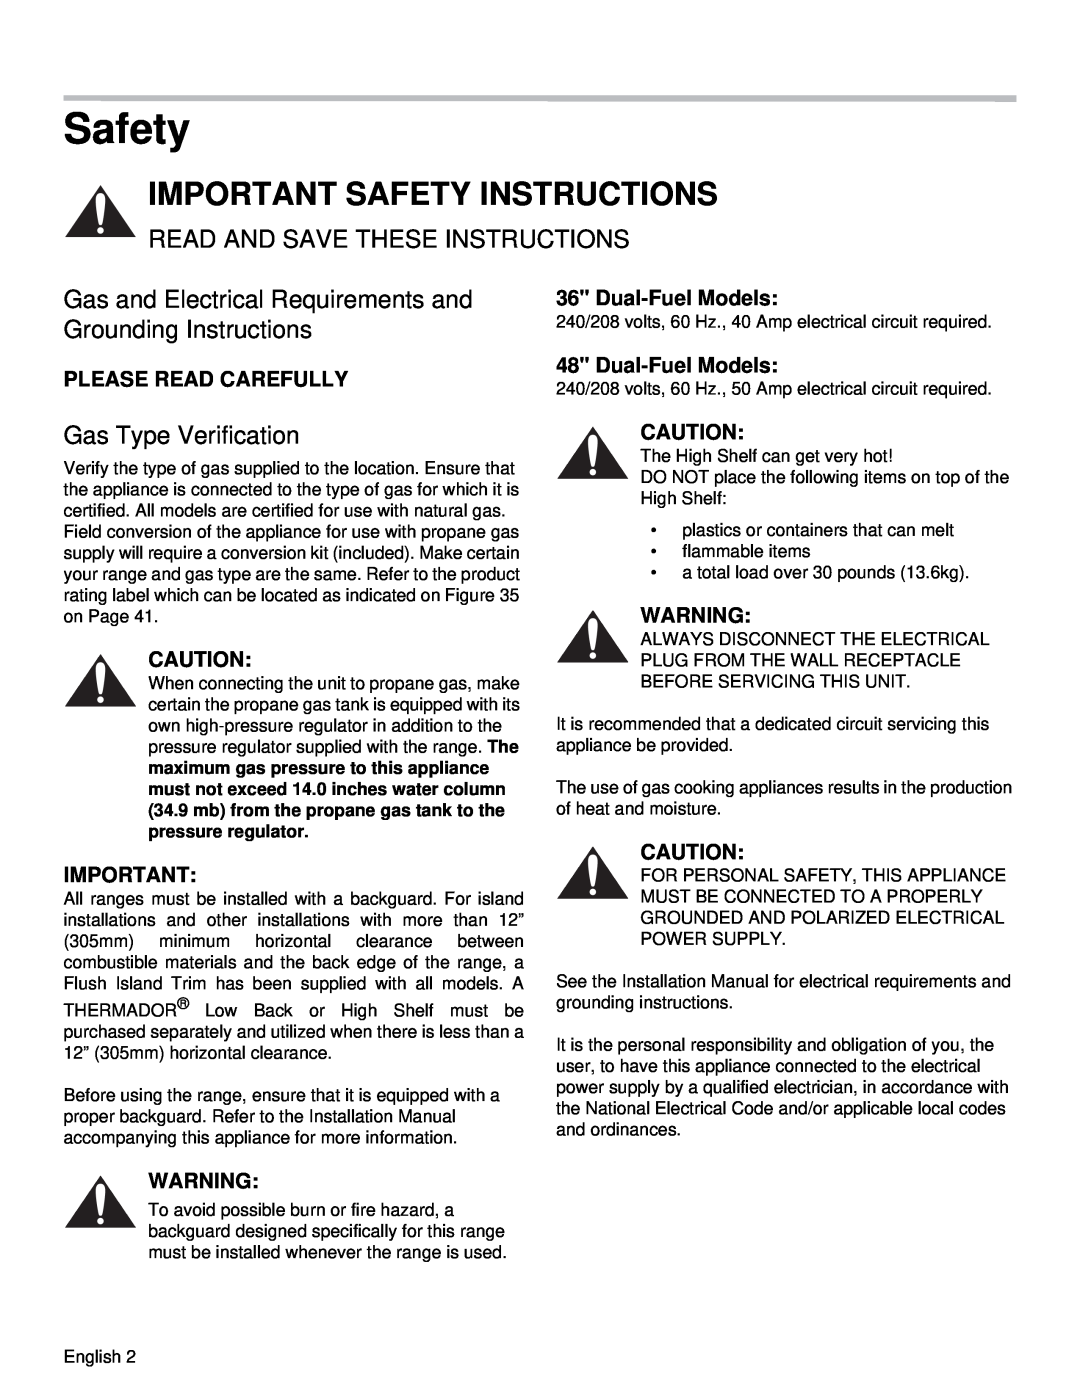 Thermador PRD36, PRD48 manual Important Safety Instructions, Read And Save These Instructions, Gas Type Verification 